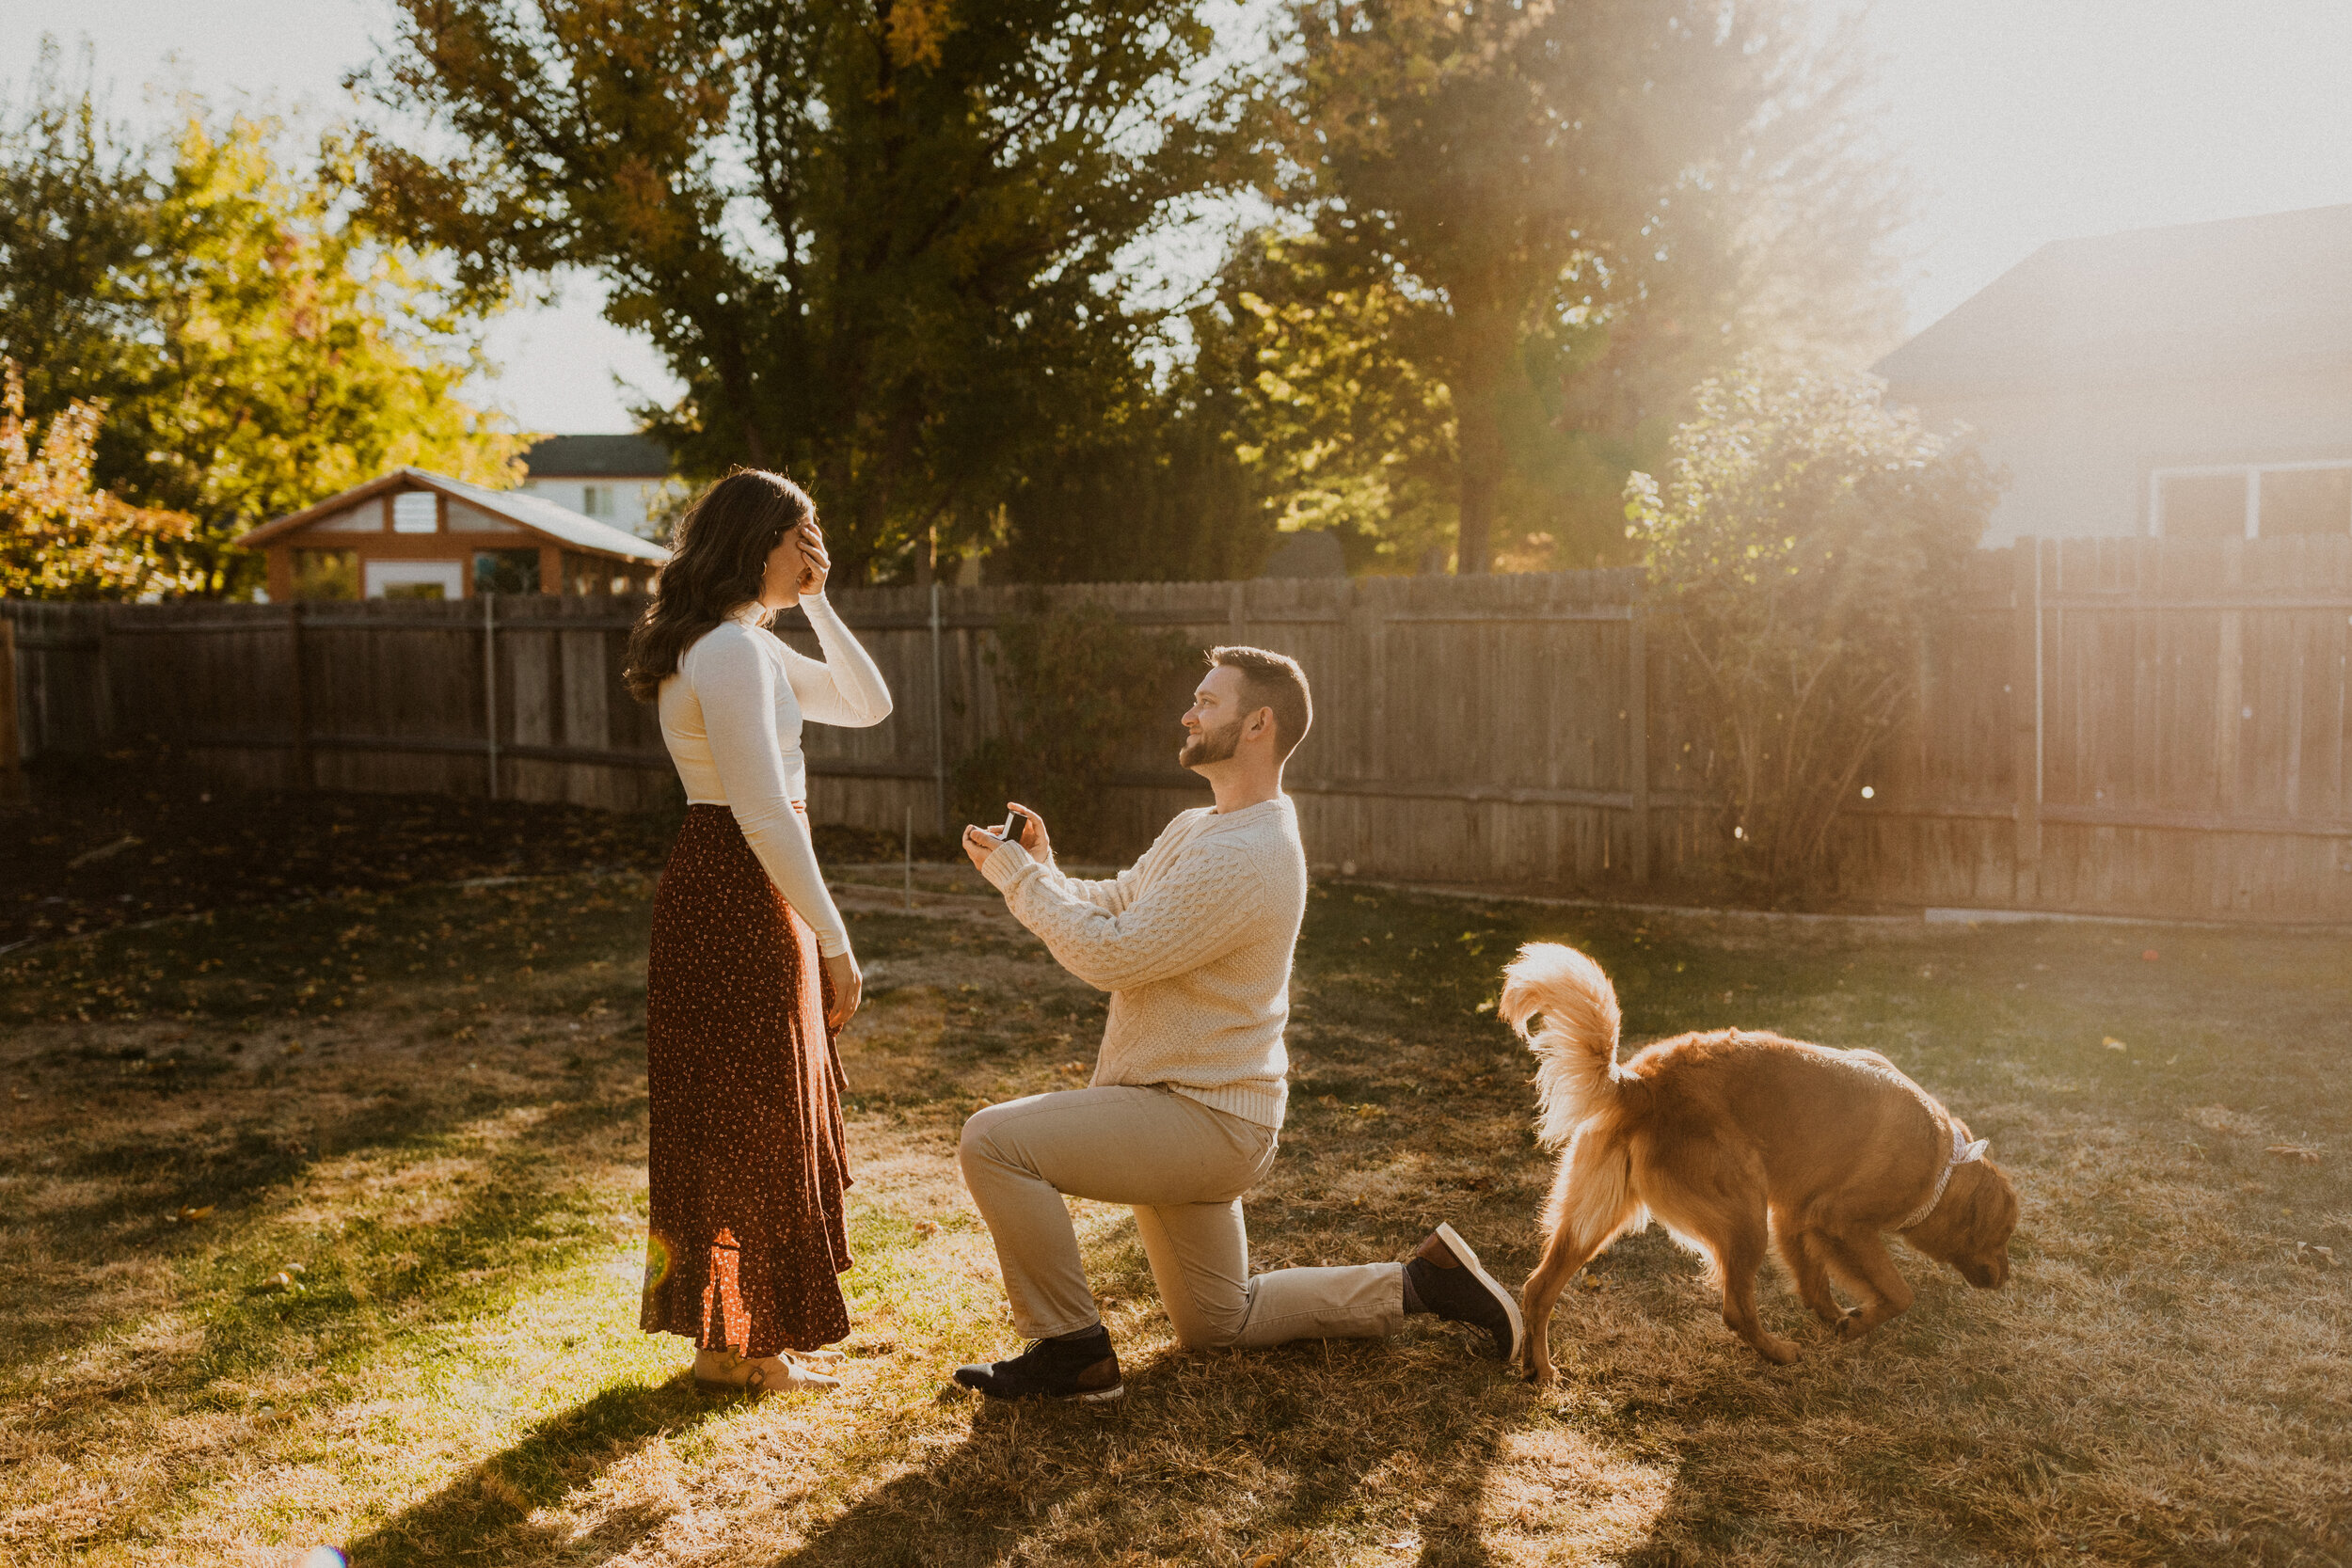  in october or 2019 - ryan popped the question and we started planning our wedding!! 